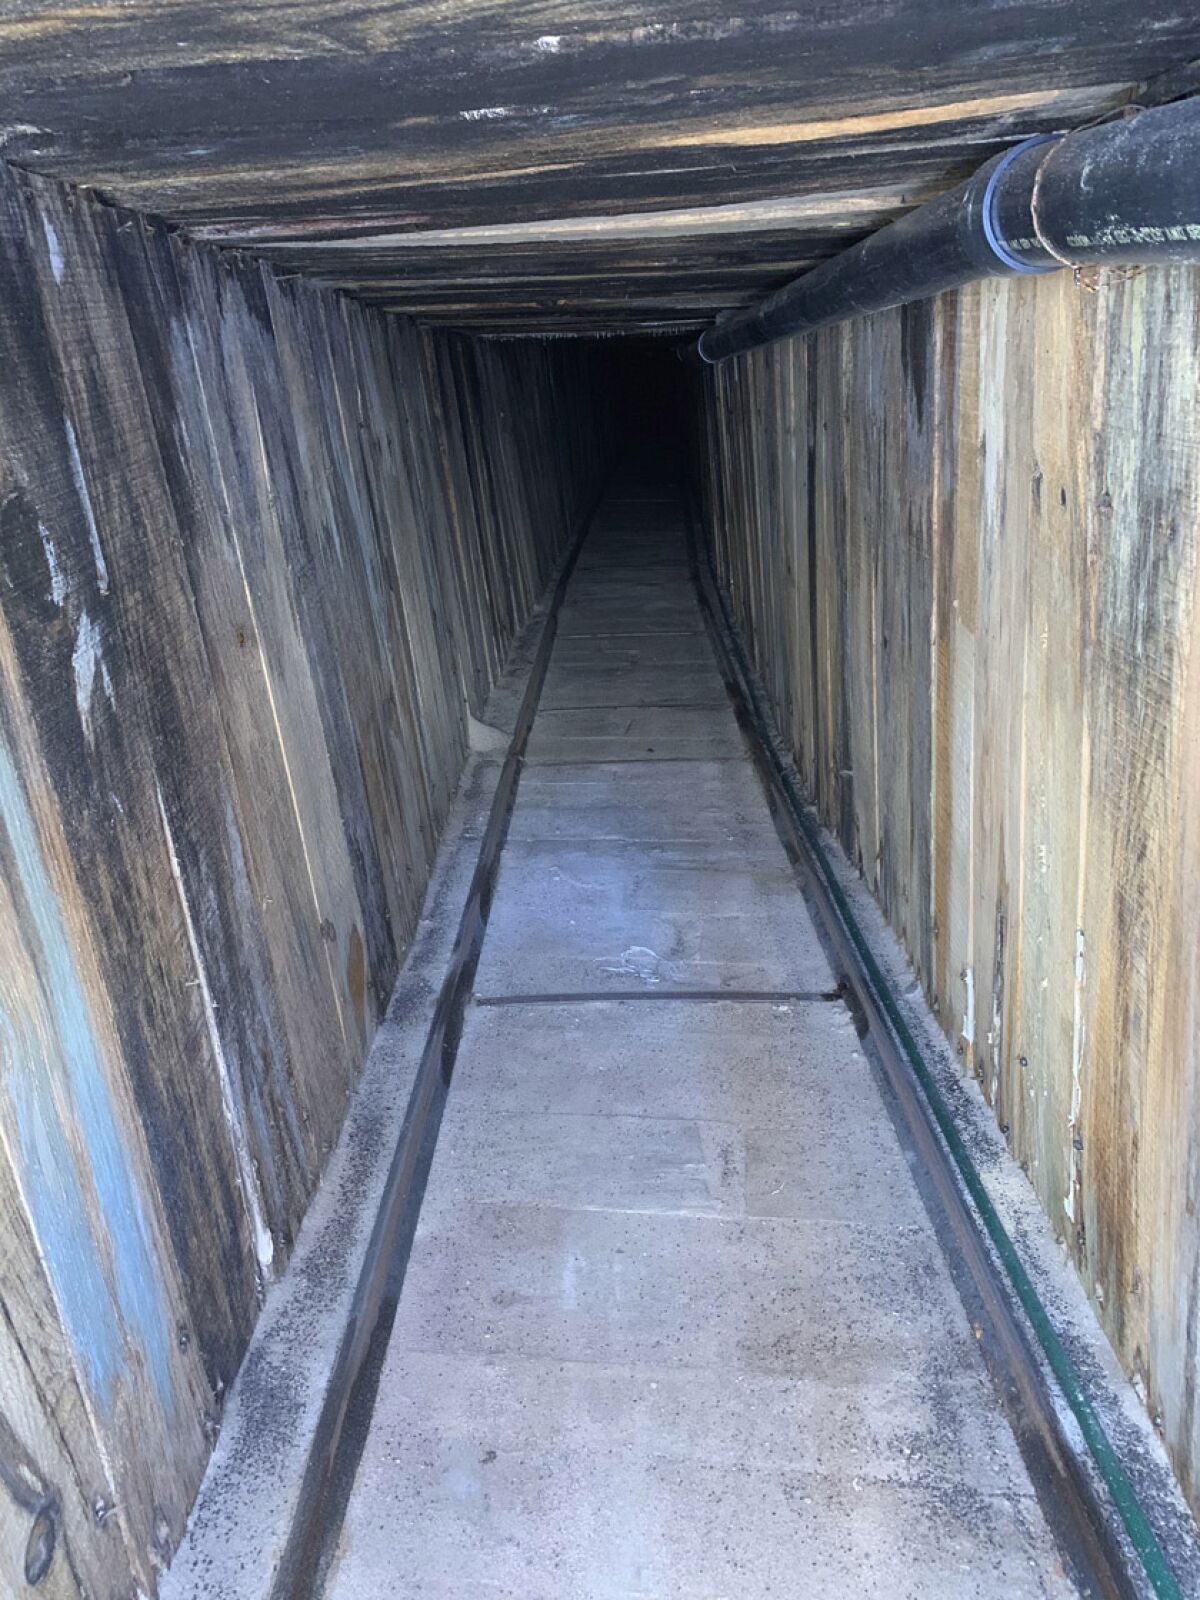 Inside the incomplete tunnel.